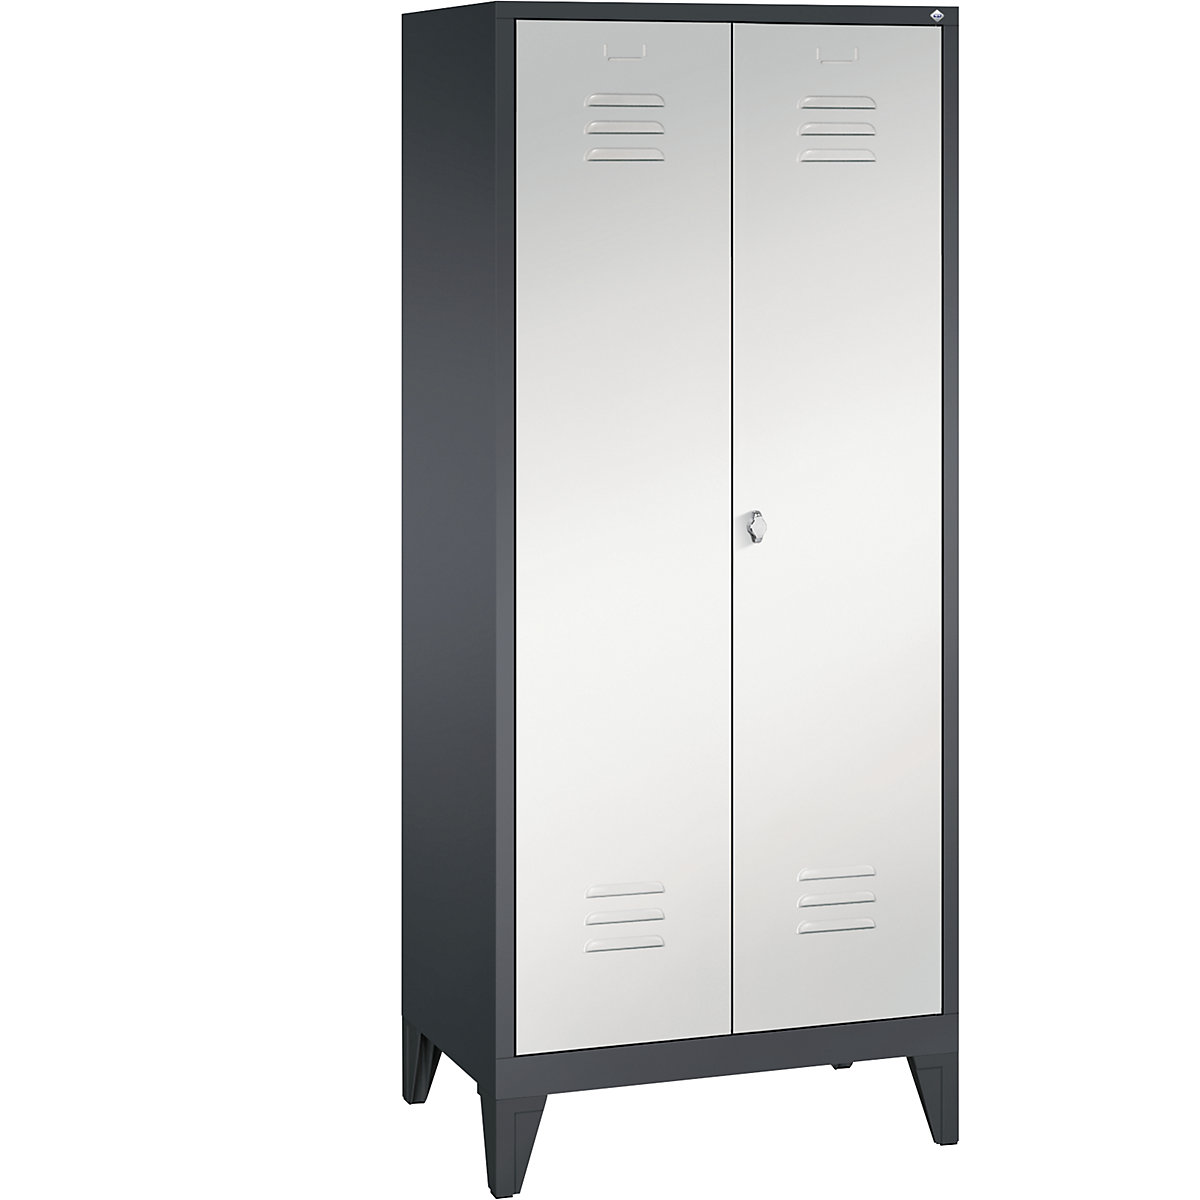 CLASSIC equipment cupboard with feet – C+P, 2 compartments, compartment width 400 mm, black grey / light grey-11